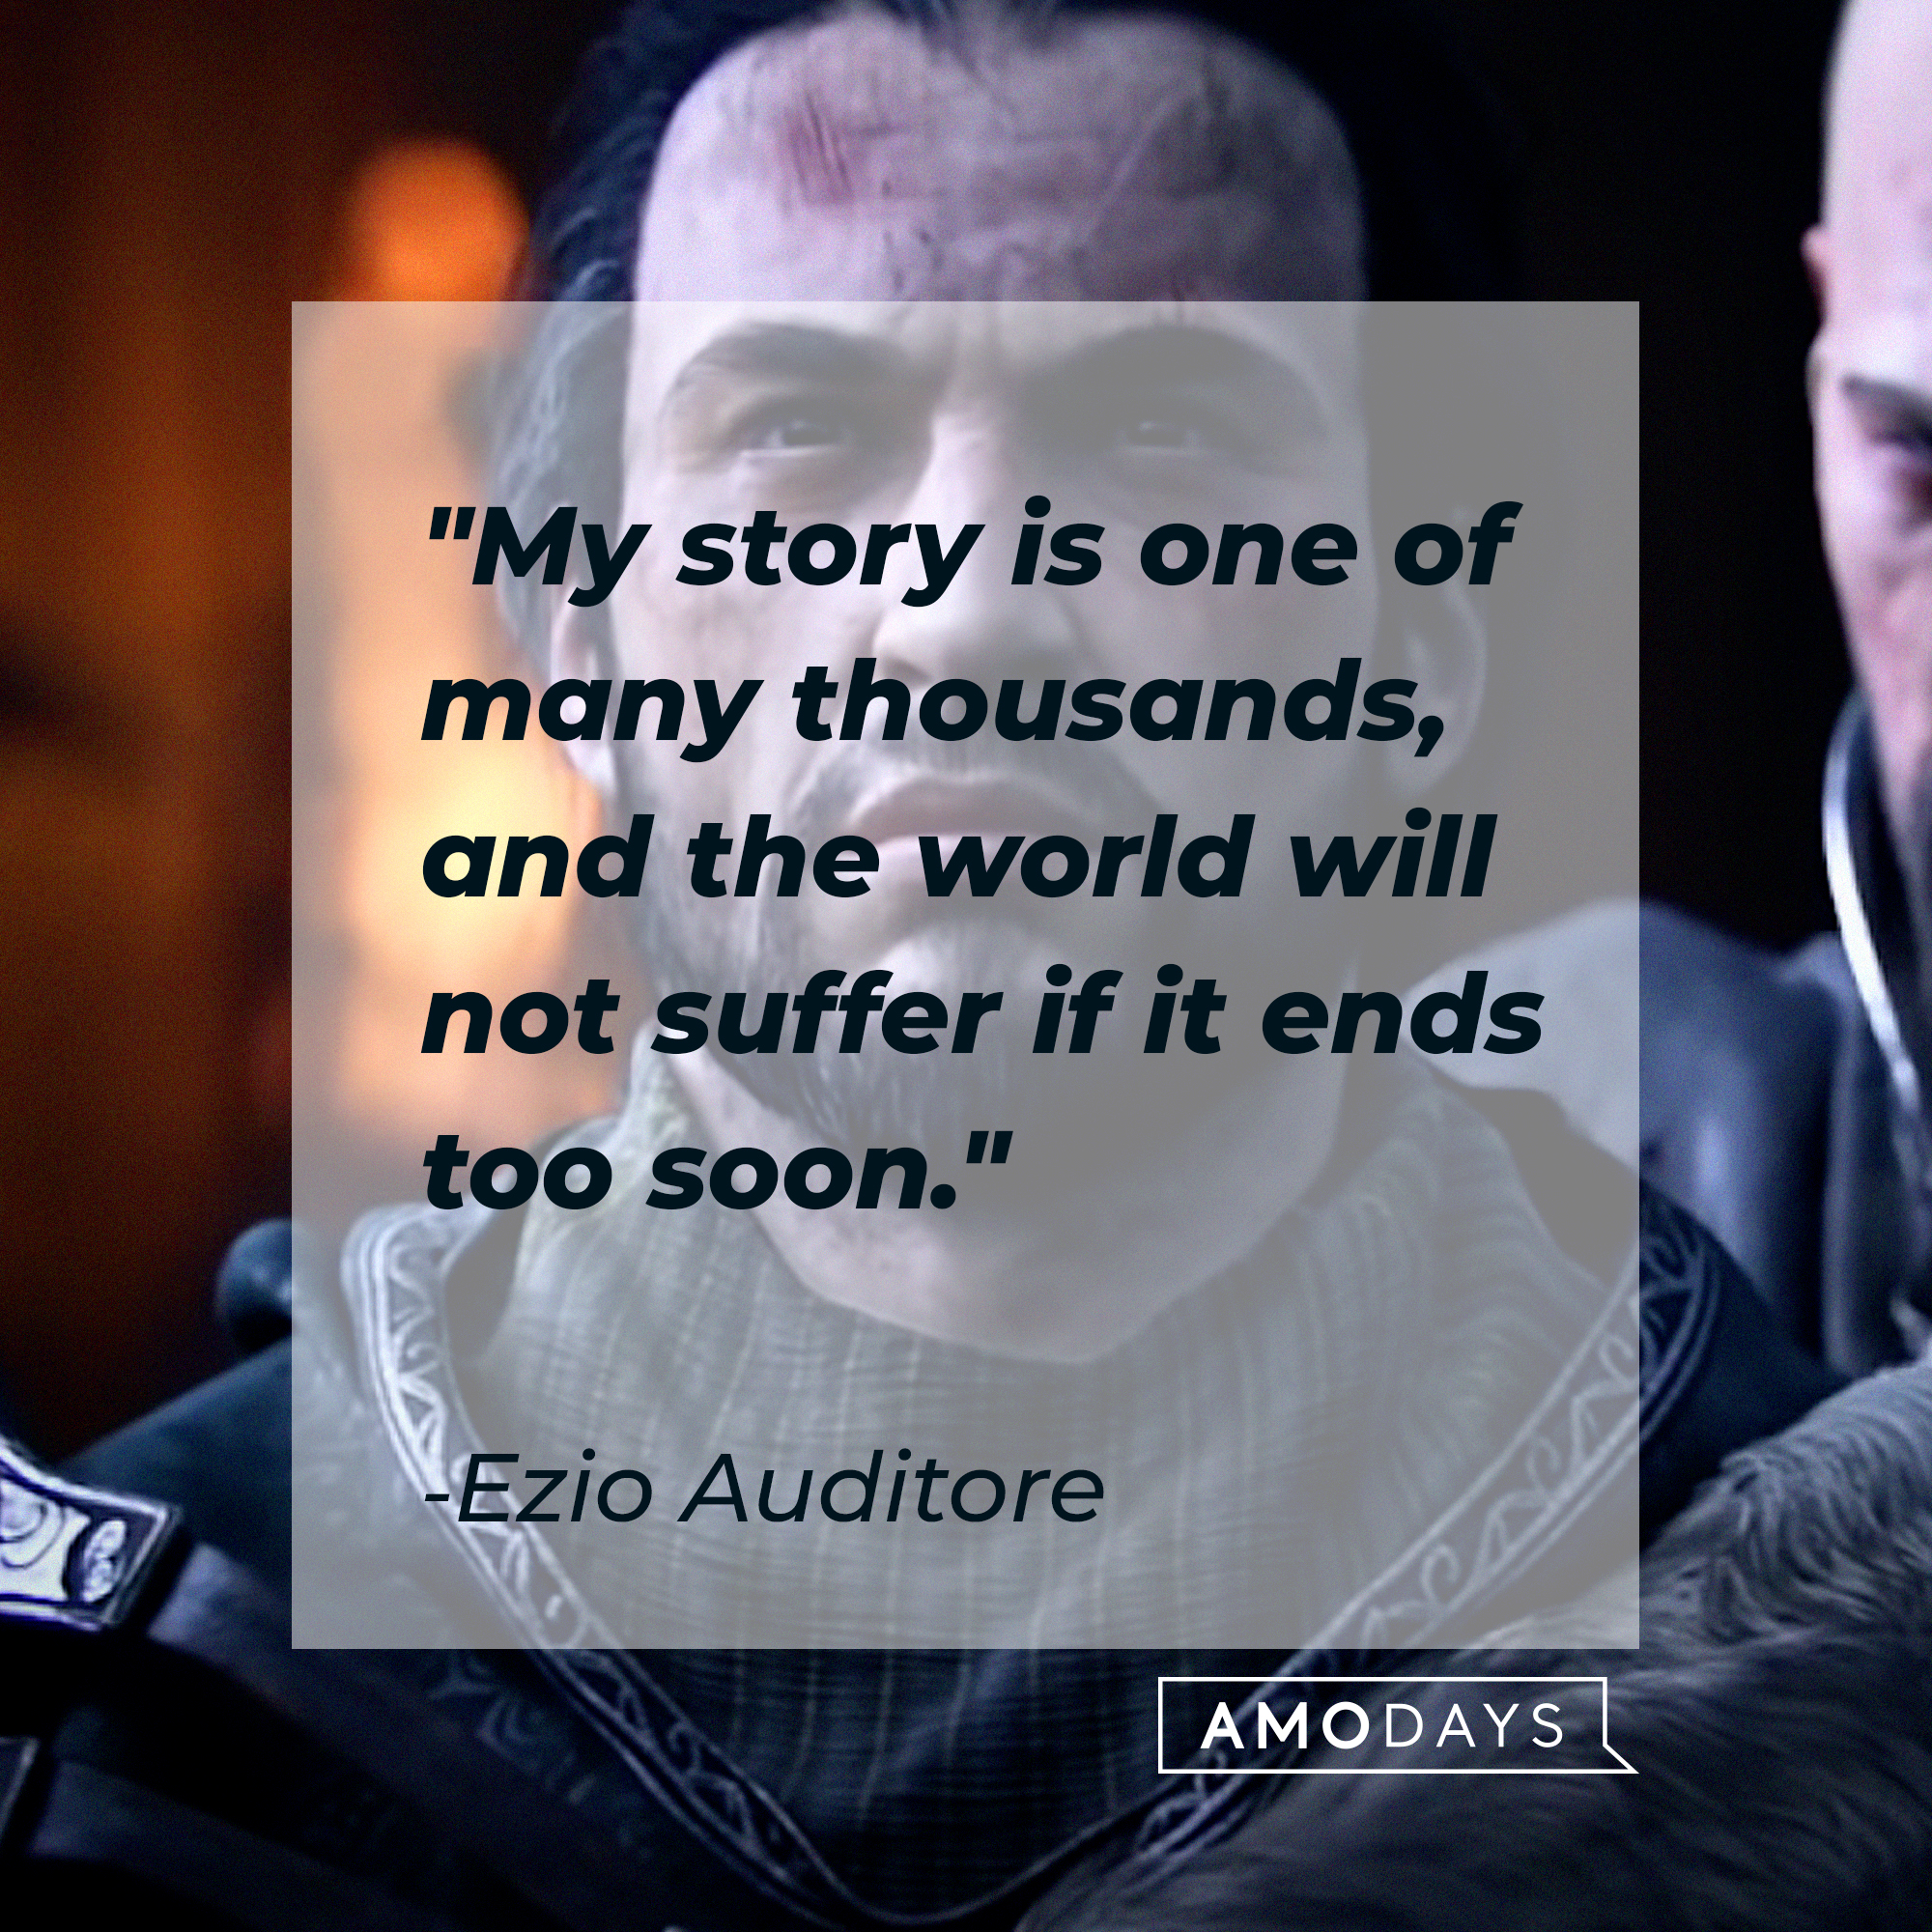 Enzo Auditore's quote: "My story is one of many thousands, and the world will not suffer if it ends too soon." | Source: youtube.com/UbisoftNA